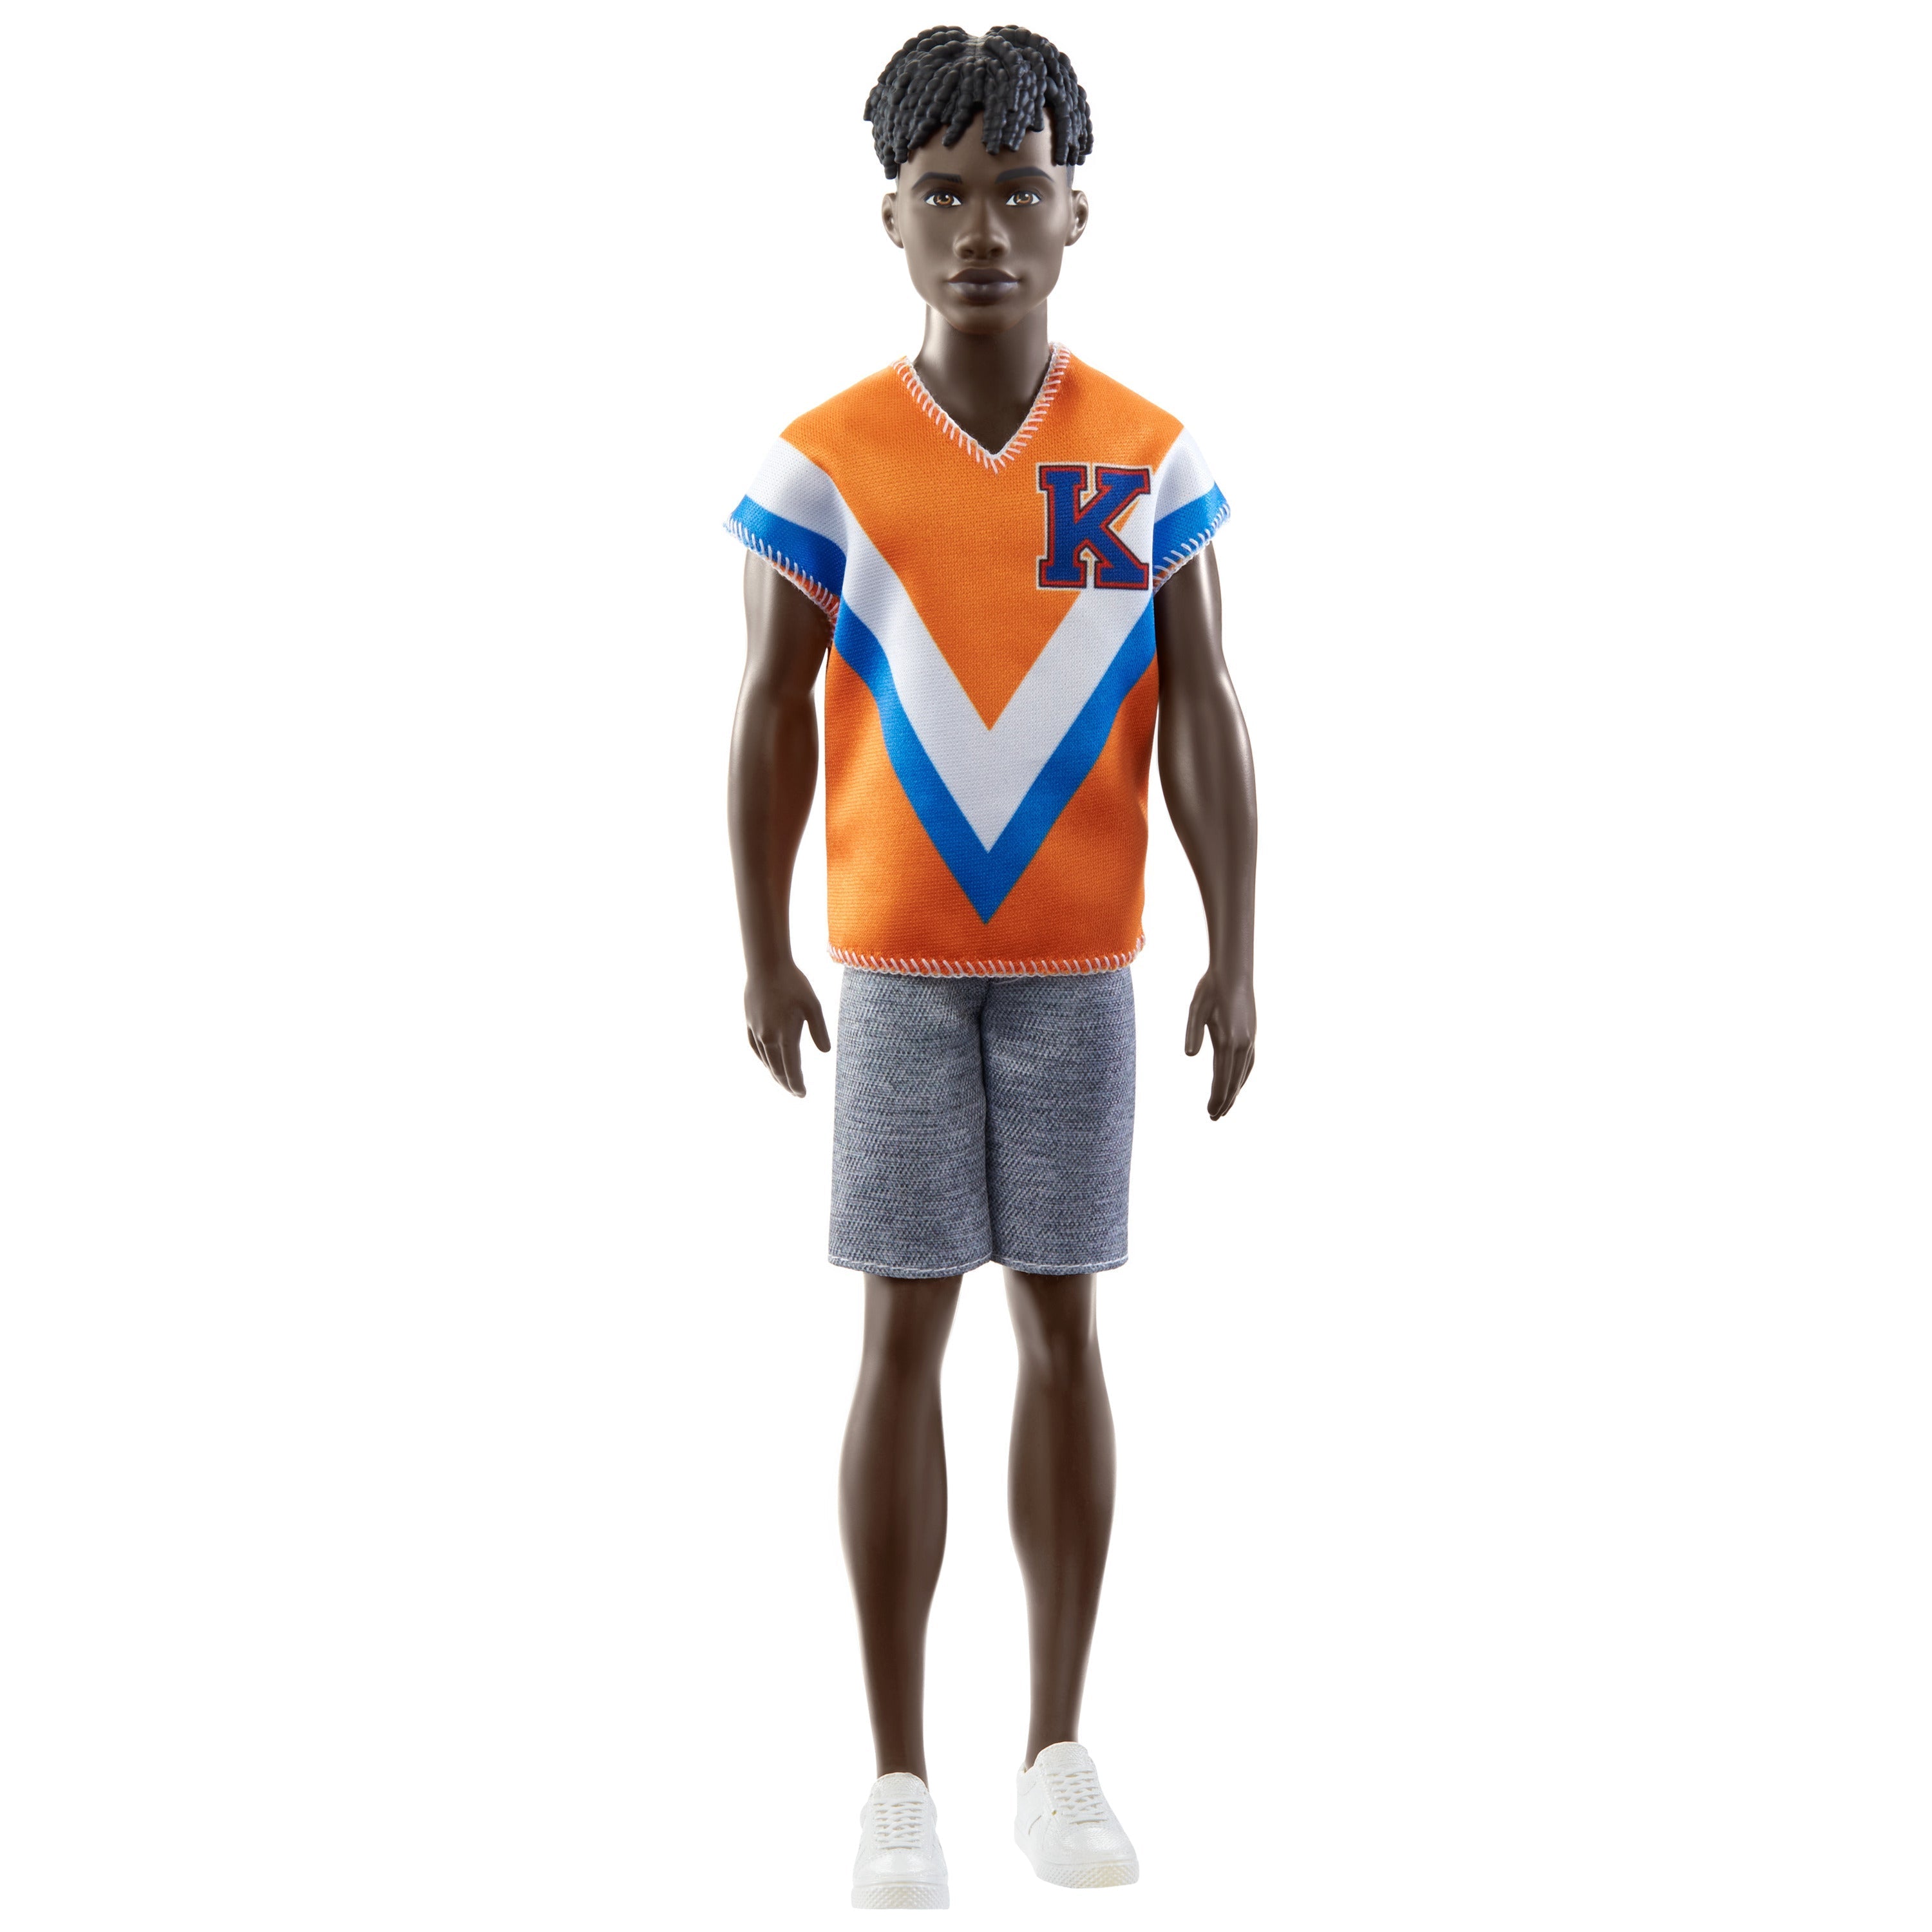 Mattel-Barbie Ken Fashionistas Doll #203 with Twisted Black Hair, Orange Athletic Jersey, Shorts & White Sneakers-HPF79-Legacy Toys